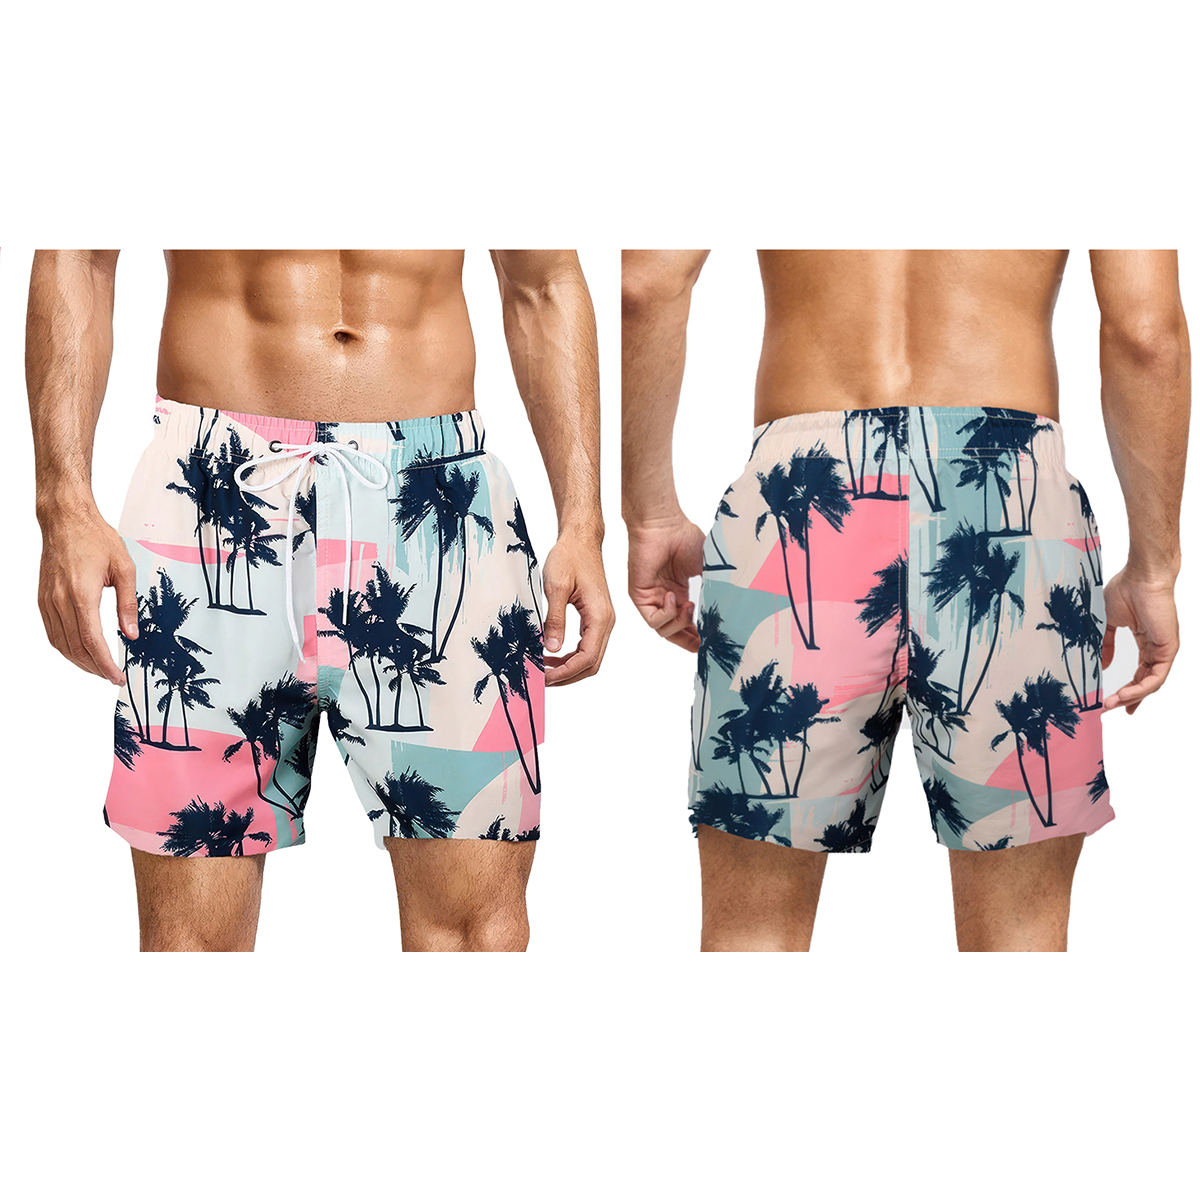 3-Pack: Men's Quick-Dry Solid & Printed Summer Beach Surf Board Swim Trunks Shorts - Large, Solid